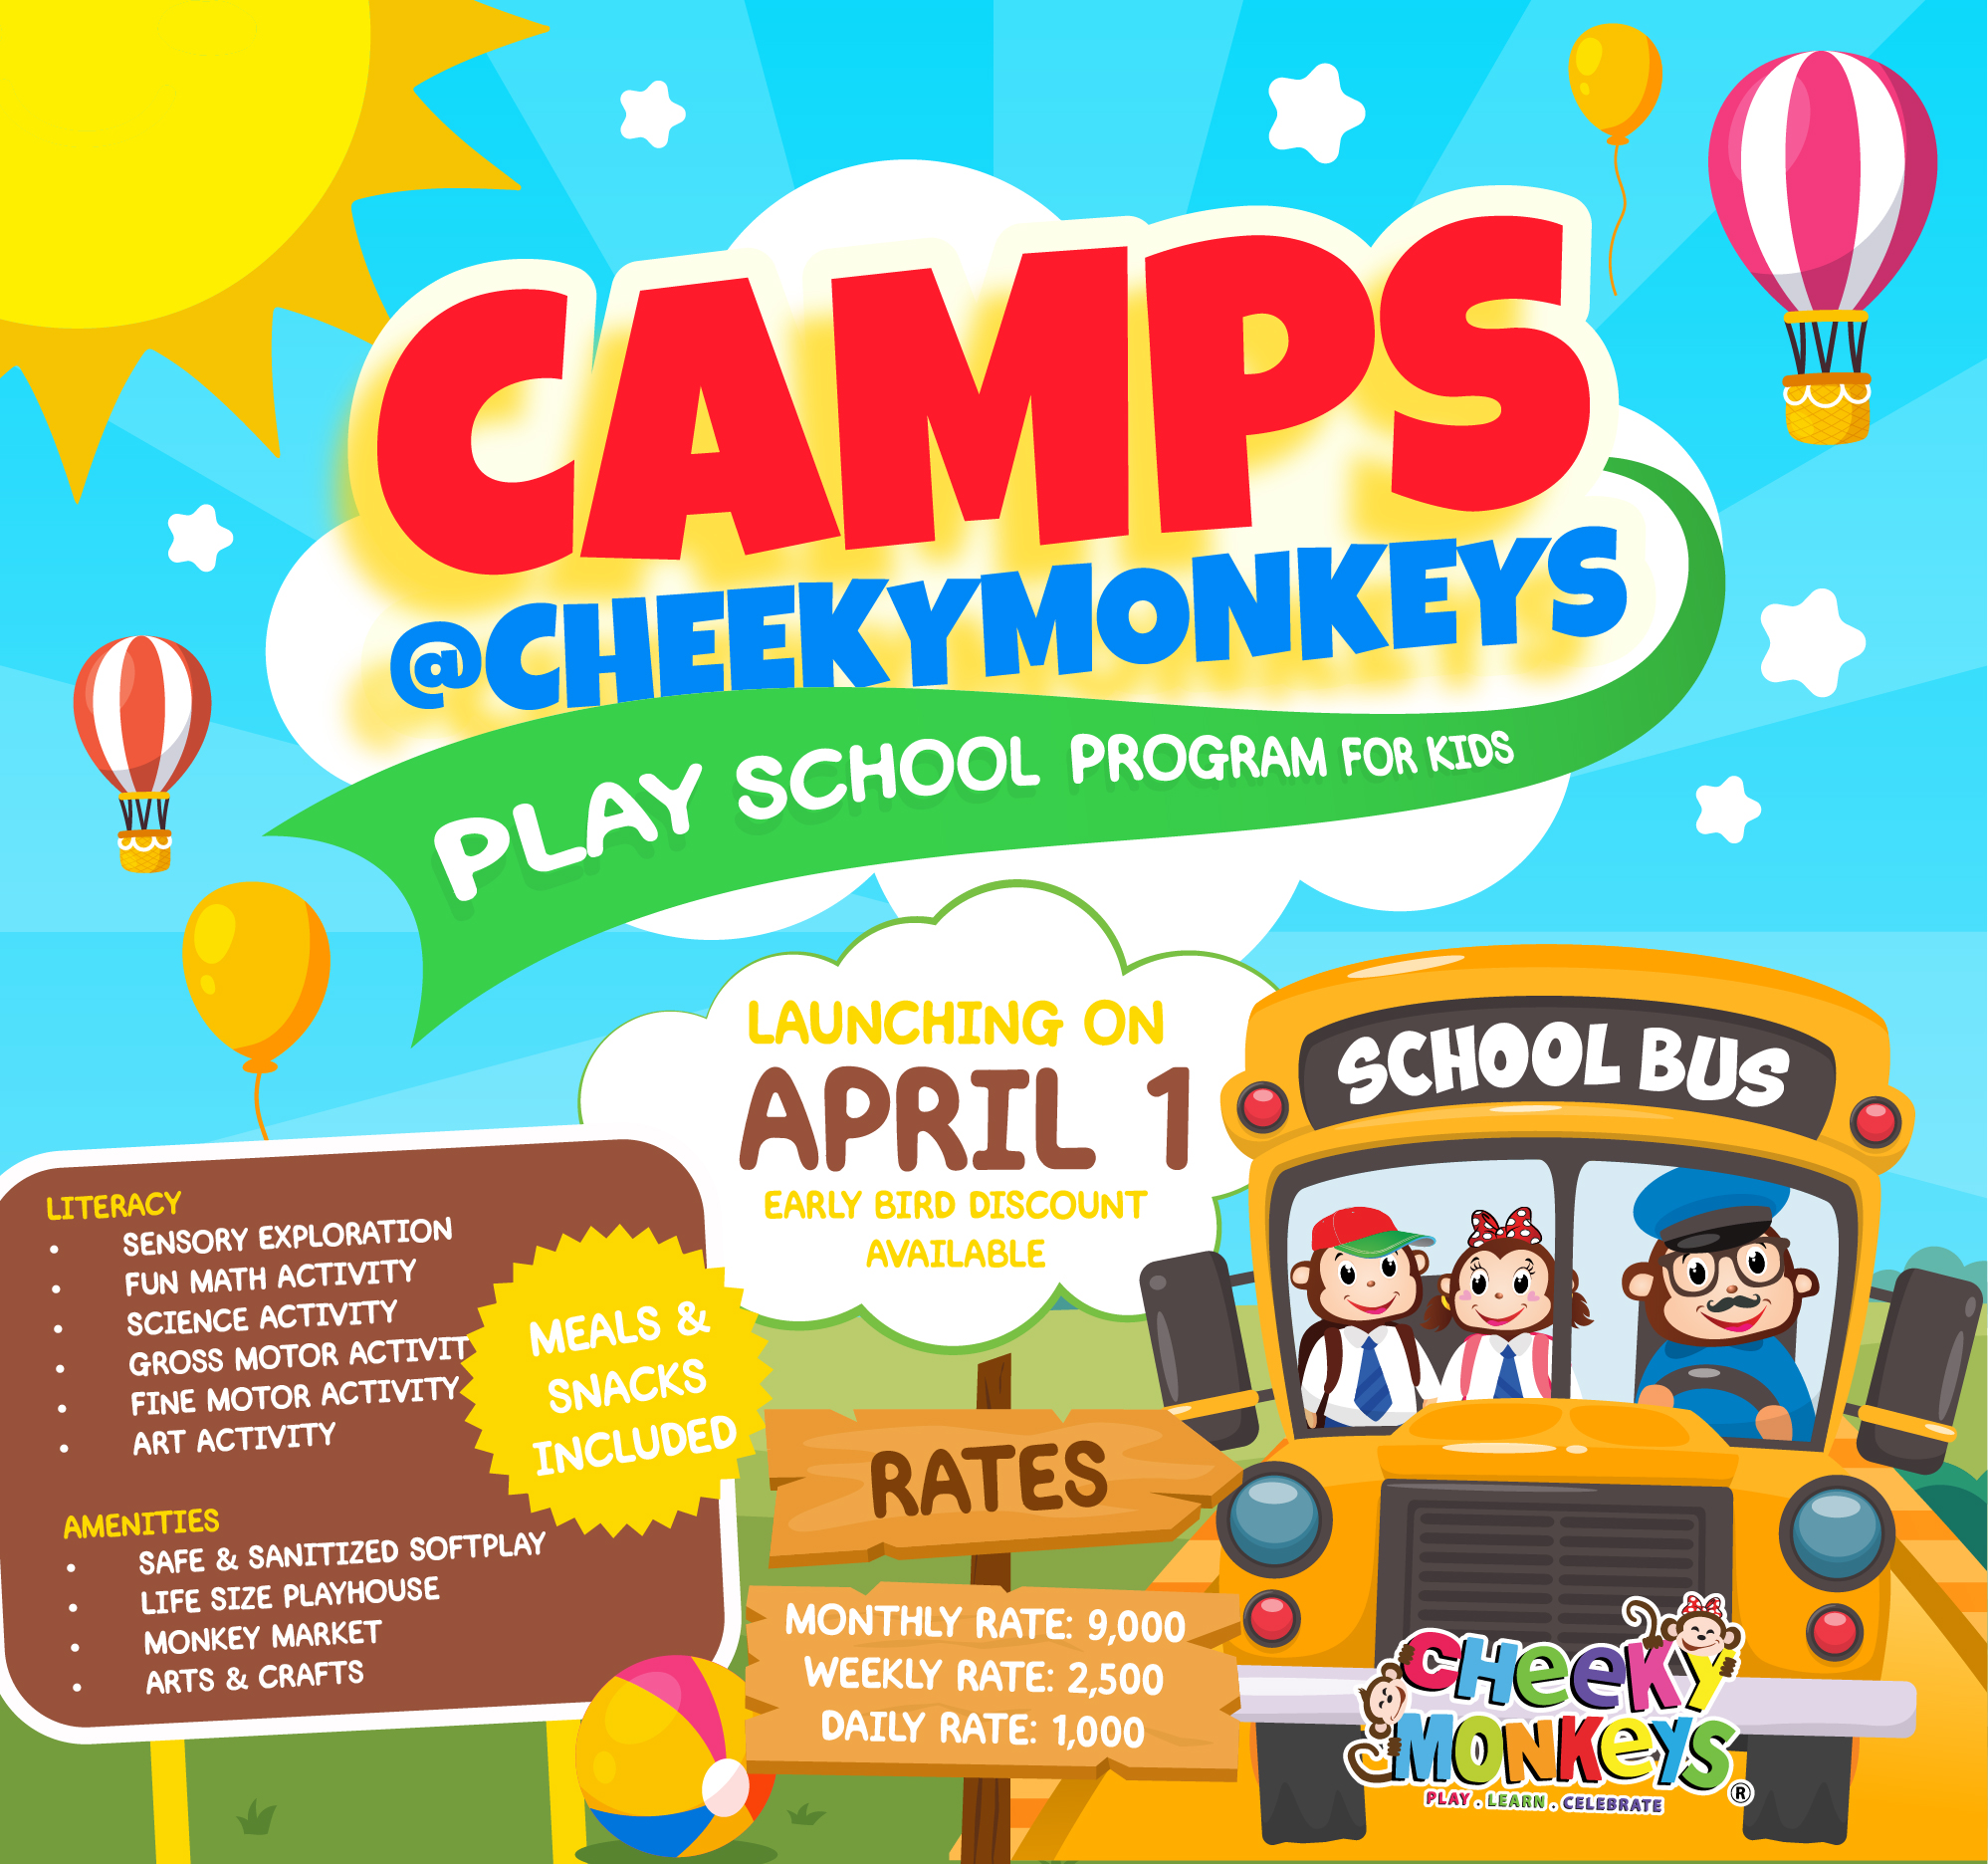 Camps at Cheeky Monkeys - Play School Program For Kids!